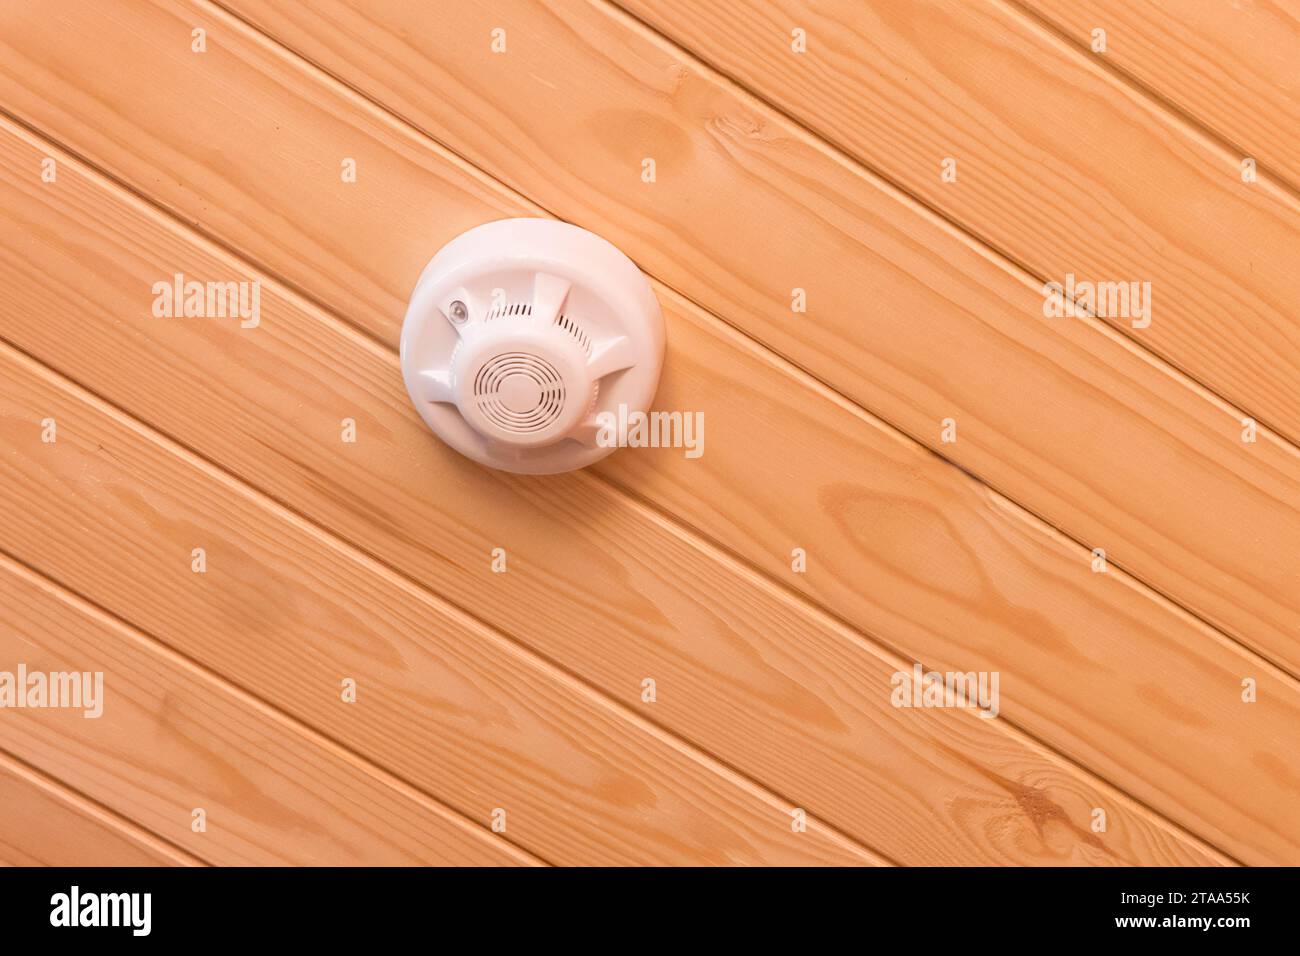 Fire alarm wooden color ceiling smoke detector safety and home protection from dangerous with fire, close-up. Stock Photo